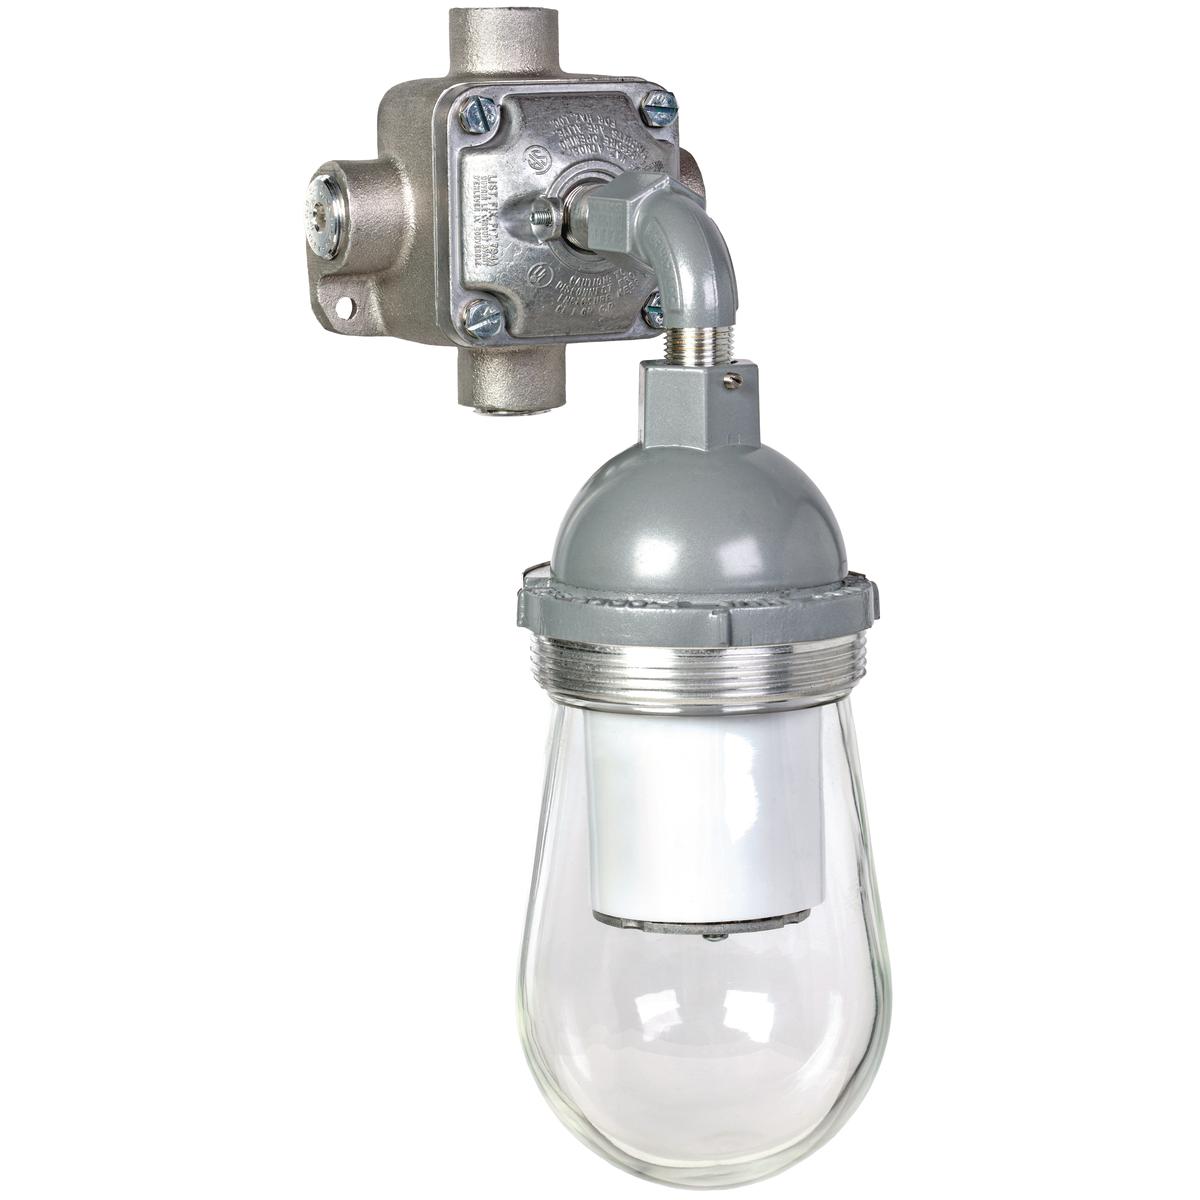 Hubbell DVL1630B1G The DVL Series is a Dust Tight/ Utility fixture using energy efficient LED's. This fixture is made with a cast copper-free aluminum housing and mount that is  suitable for harsh and hazardous environments. With the design of this fixtures internal heat si